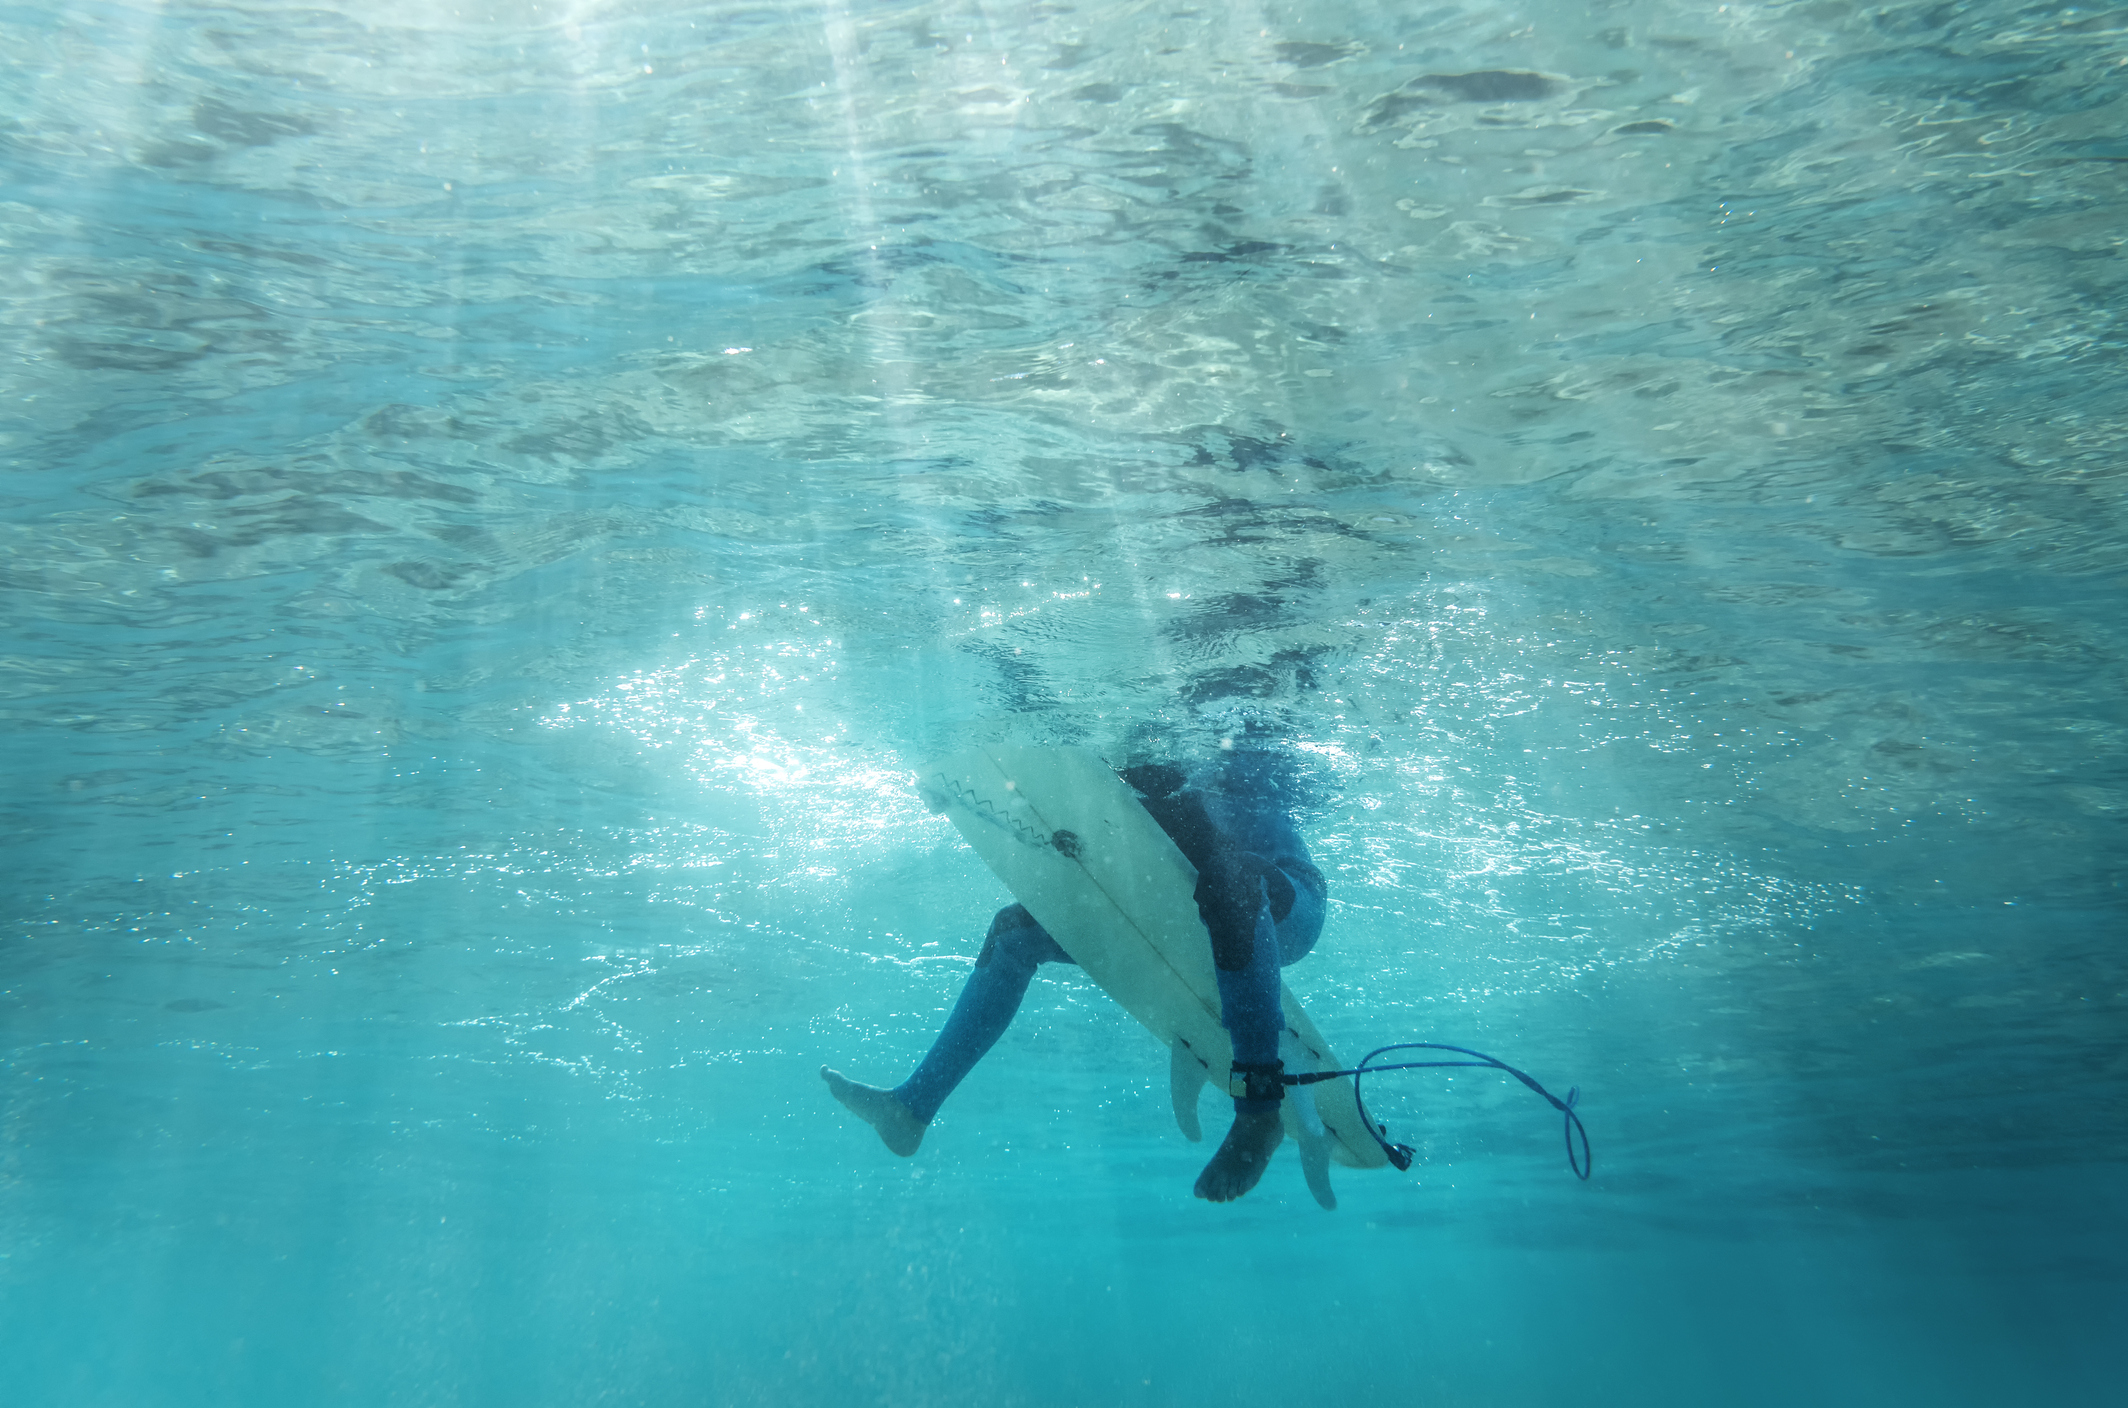 Underwater view of a surfer, as a shark would see before shark attack